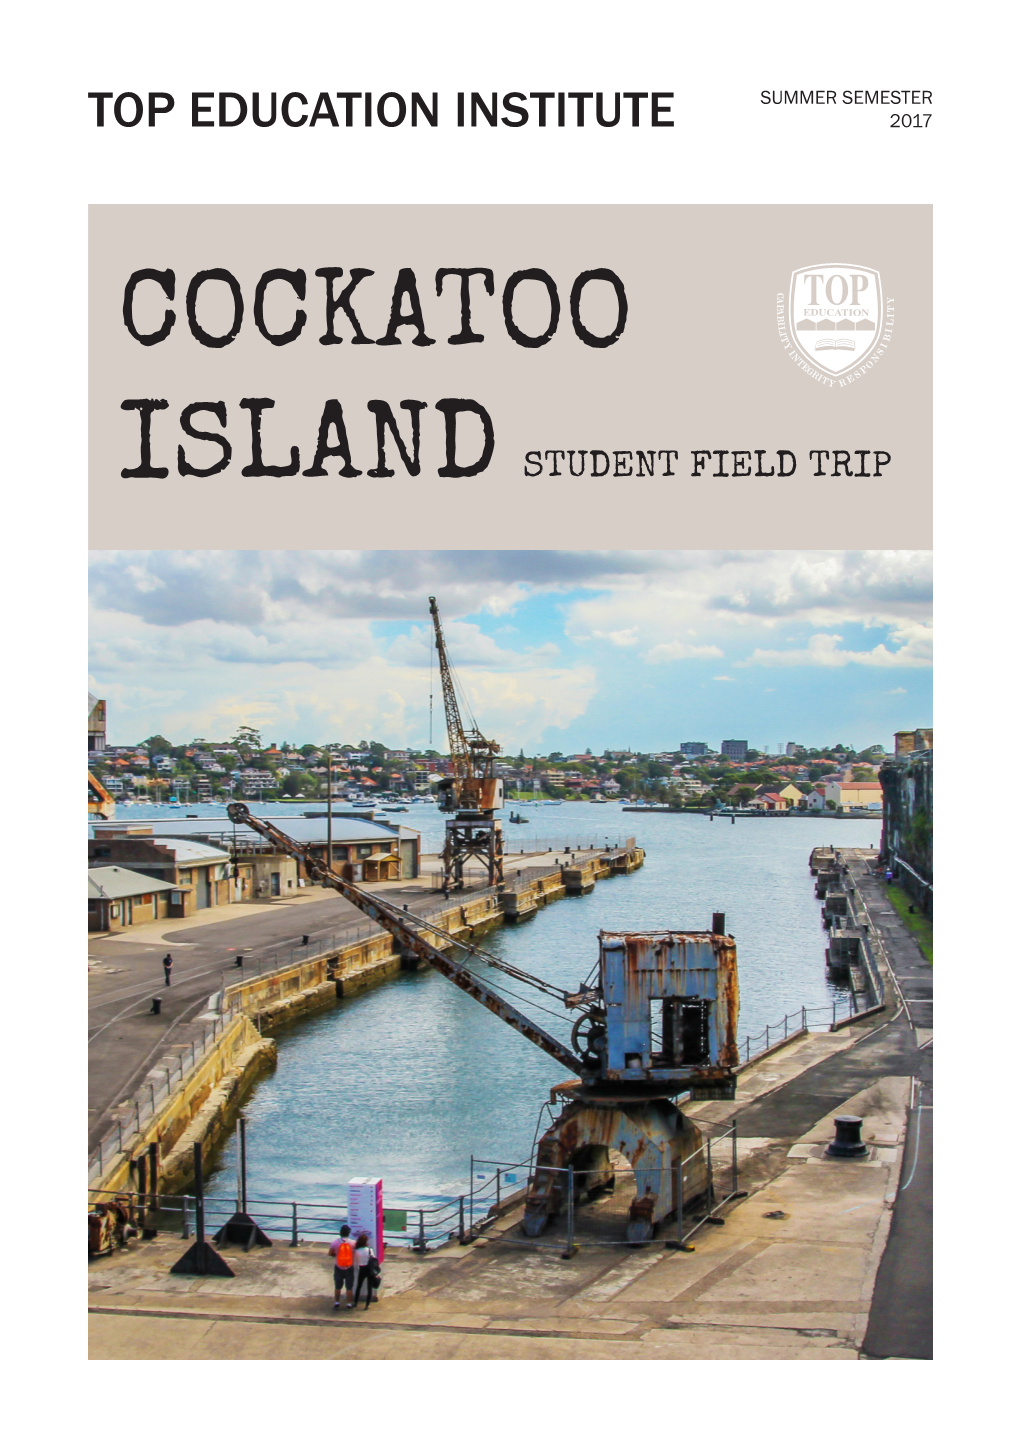 Cockatoo Island Has a Long and Illustrious History Dating Back to the Time of First Settlement, Playing a Significant Role in the Development of Sydney and the Nation